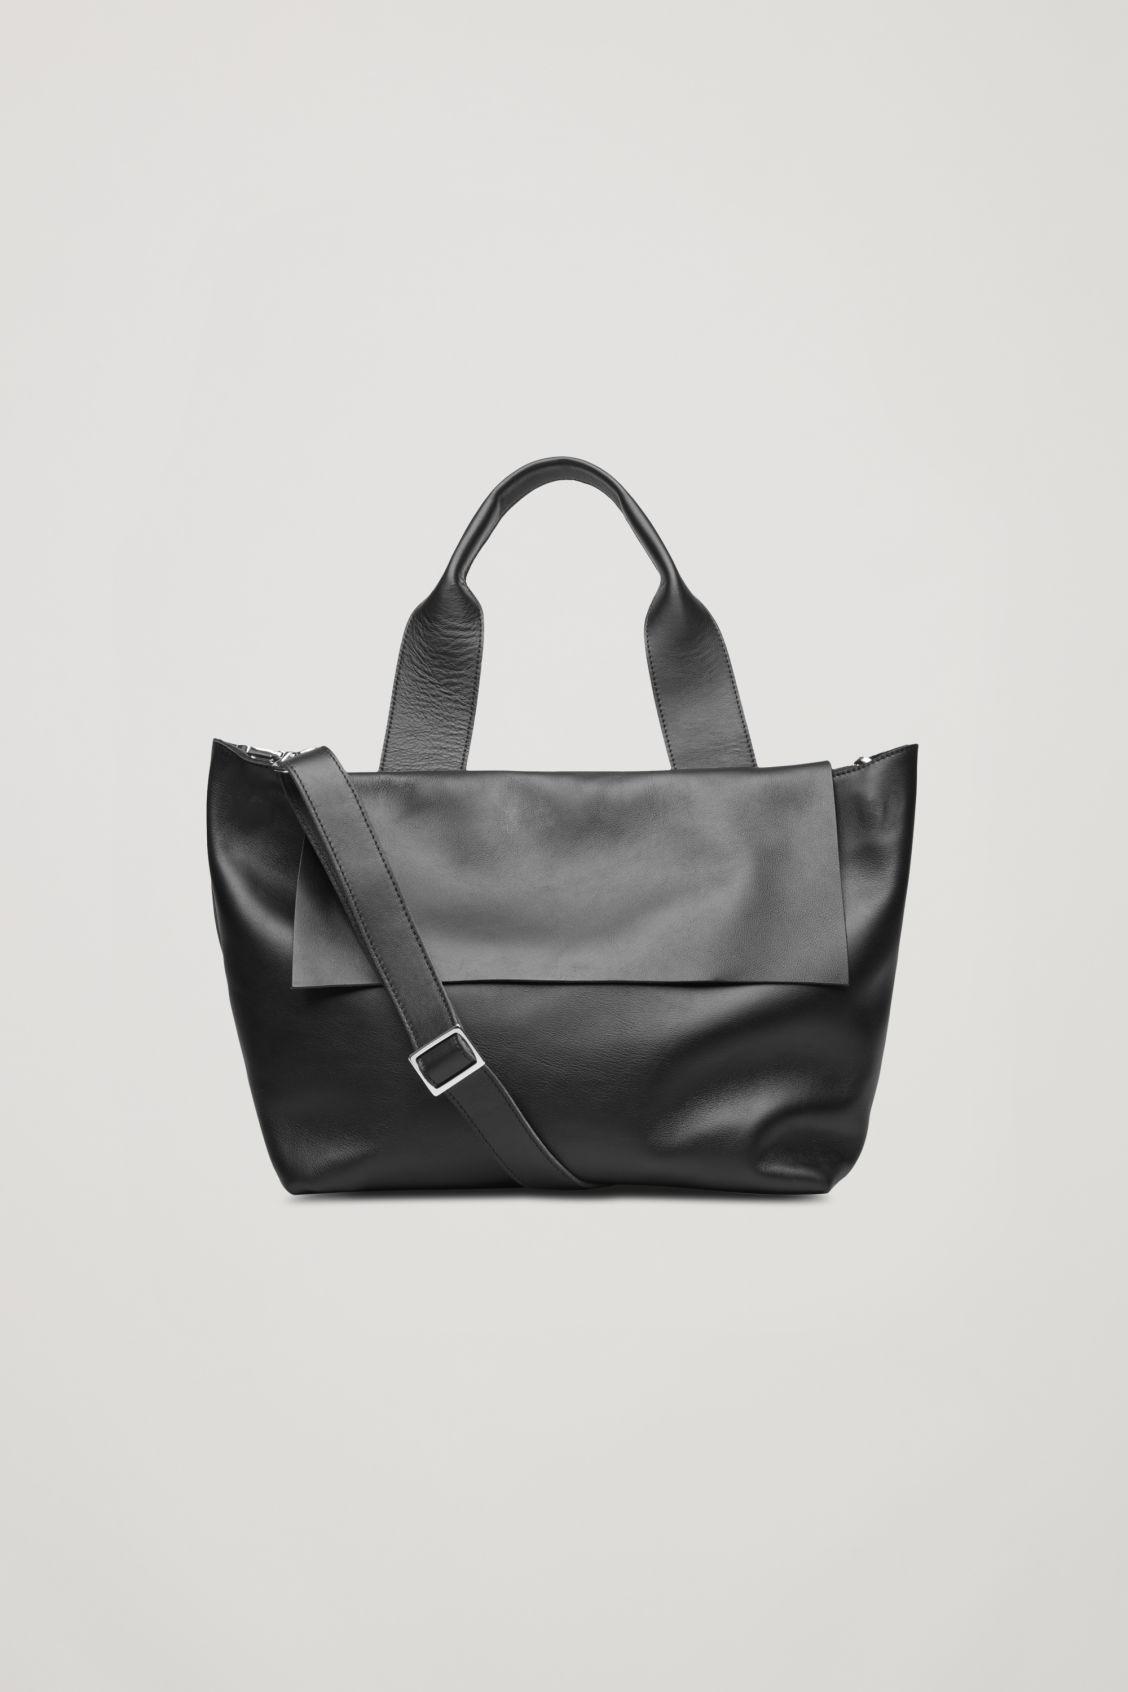 COS Leather Tote Bag With Strap in Black - Lyst